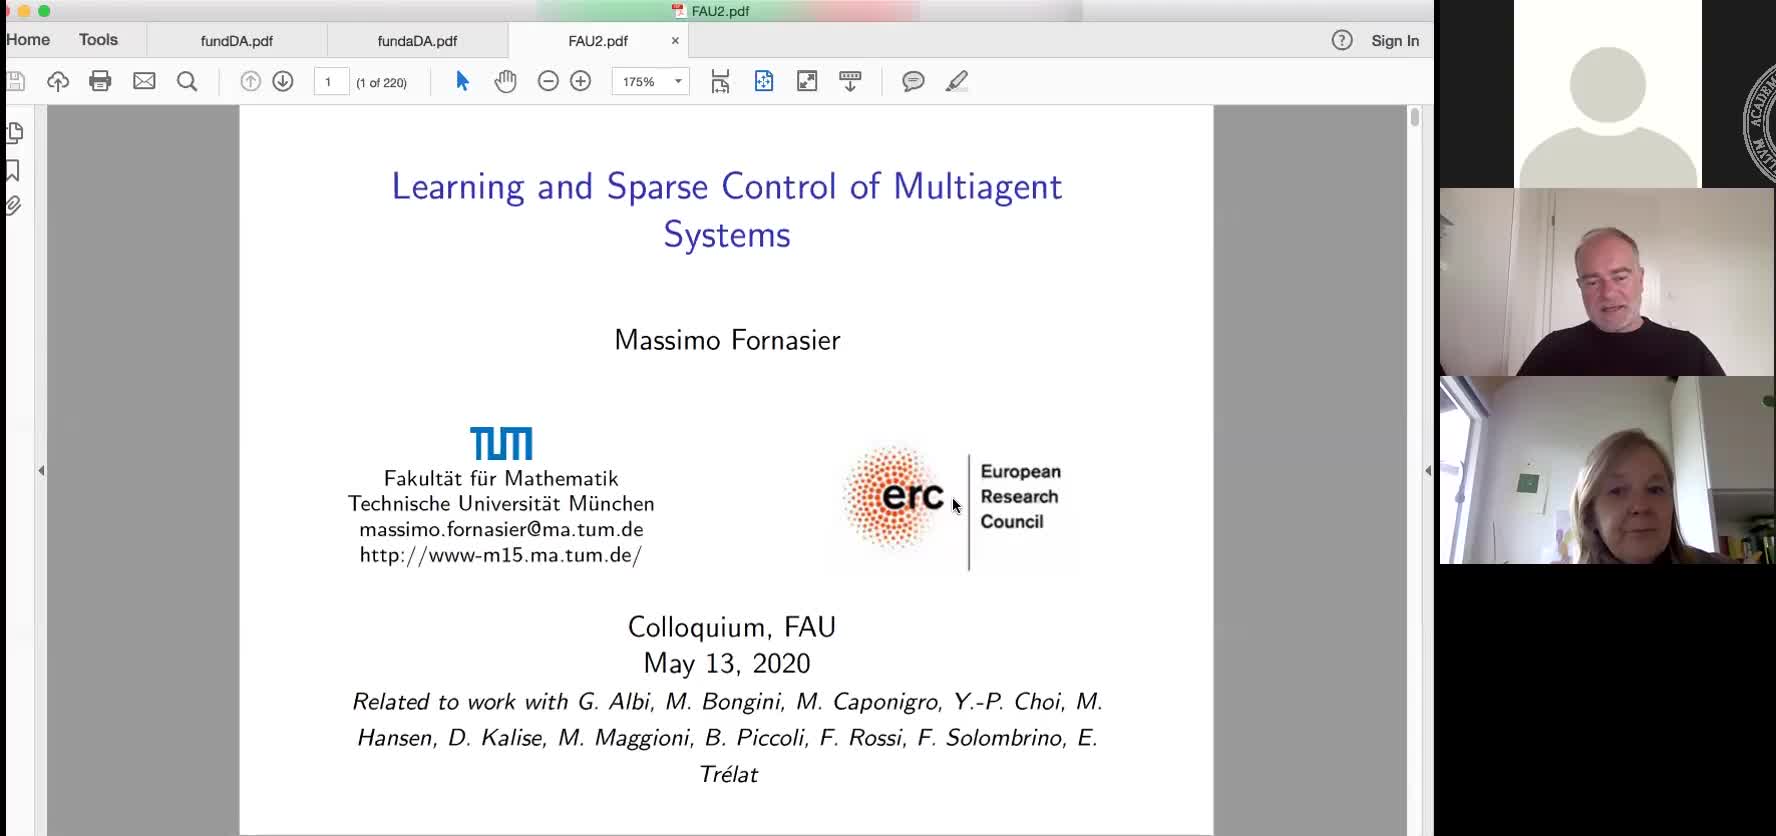 Learning and Sparse Control of Multiagent Systems (Massimo Fornaiser, TU München) preview image